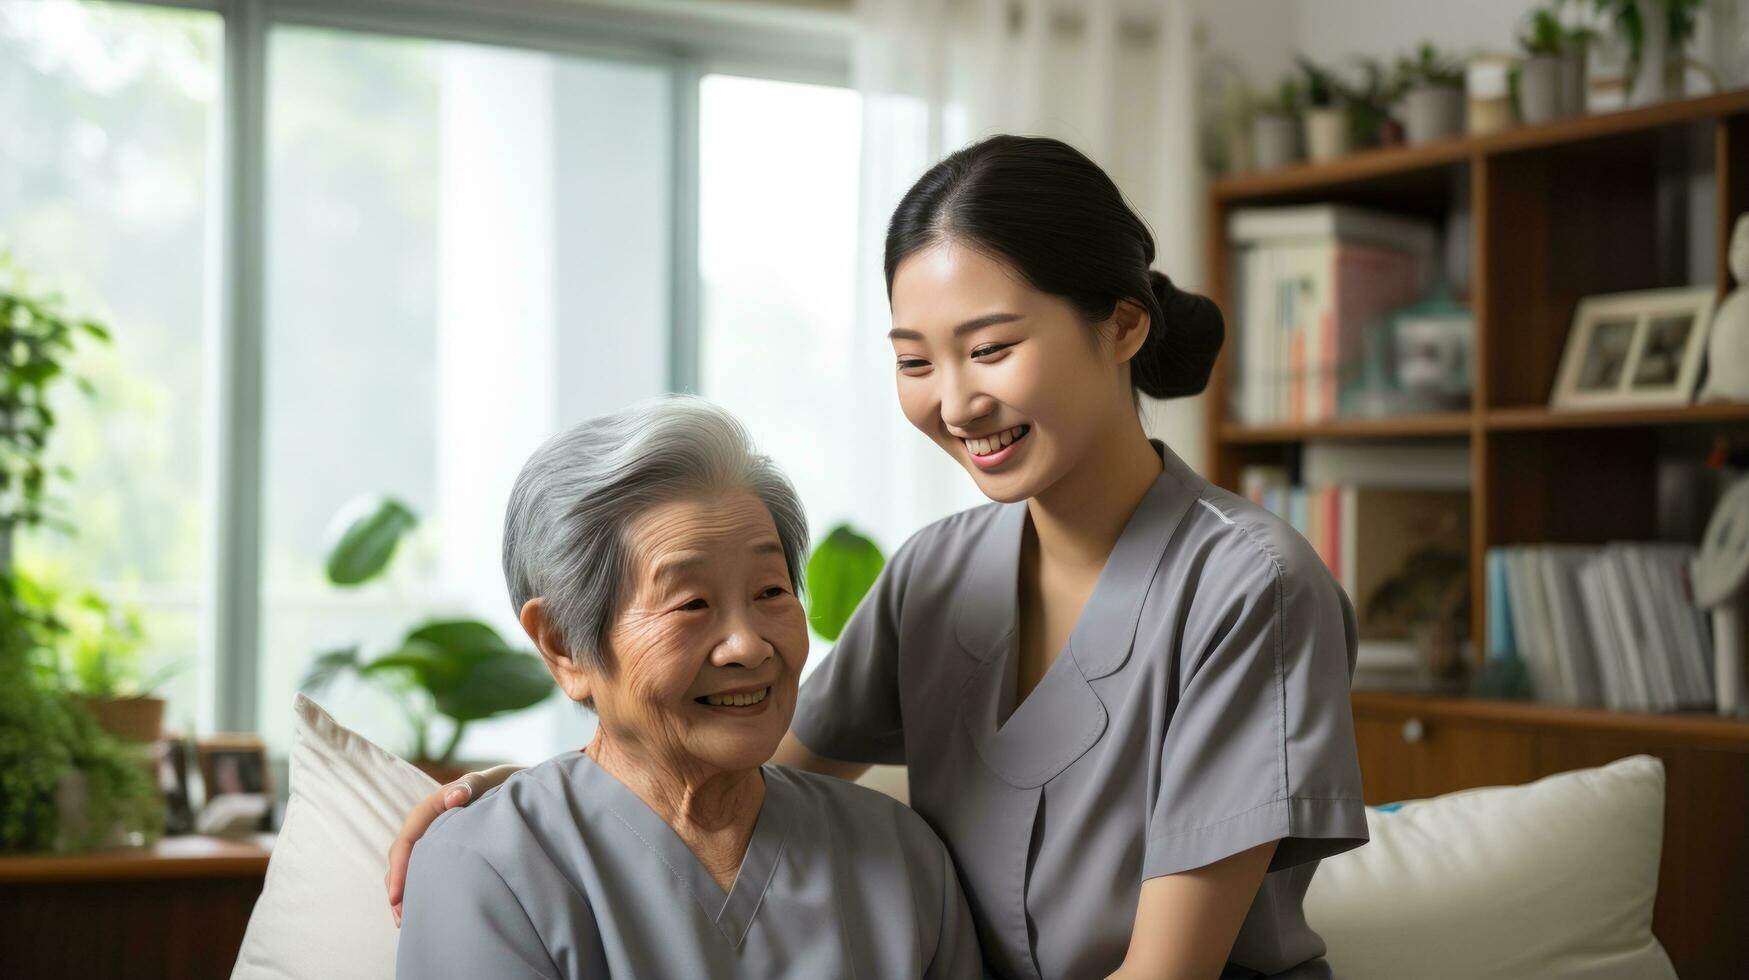 Senior patient receiving care from caregiver at home photo